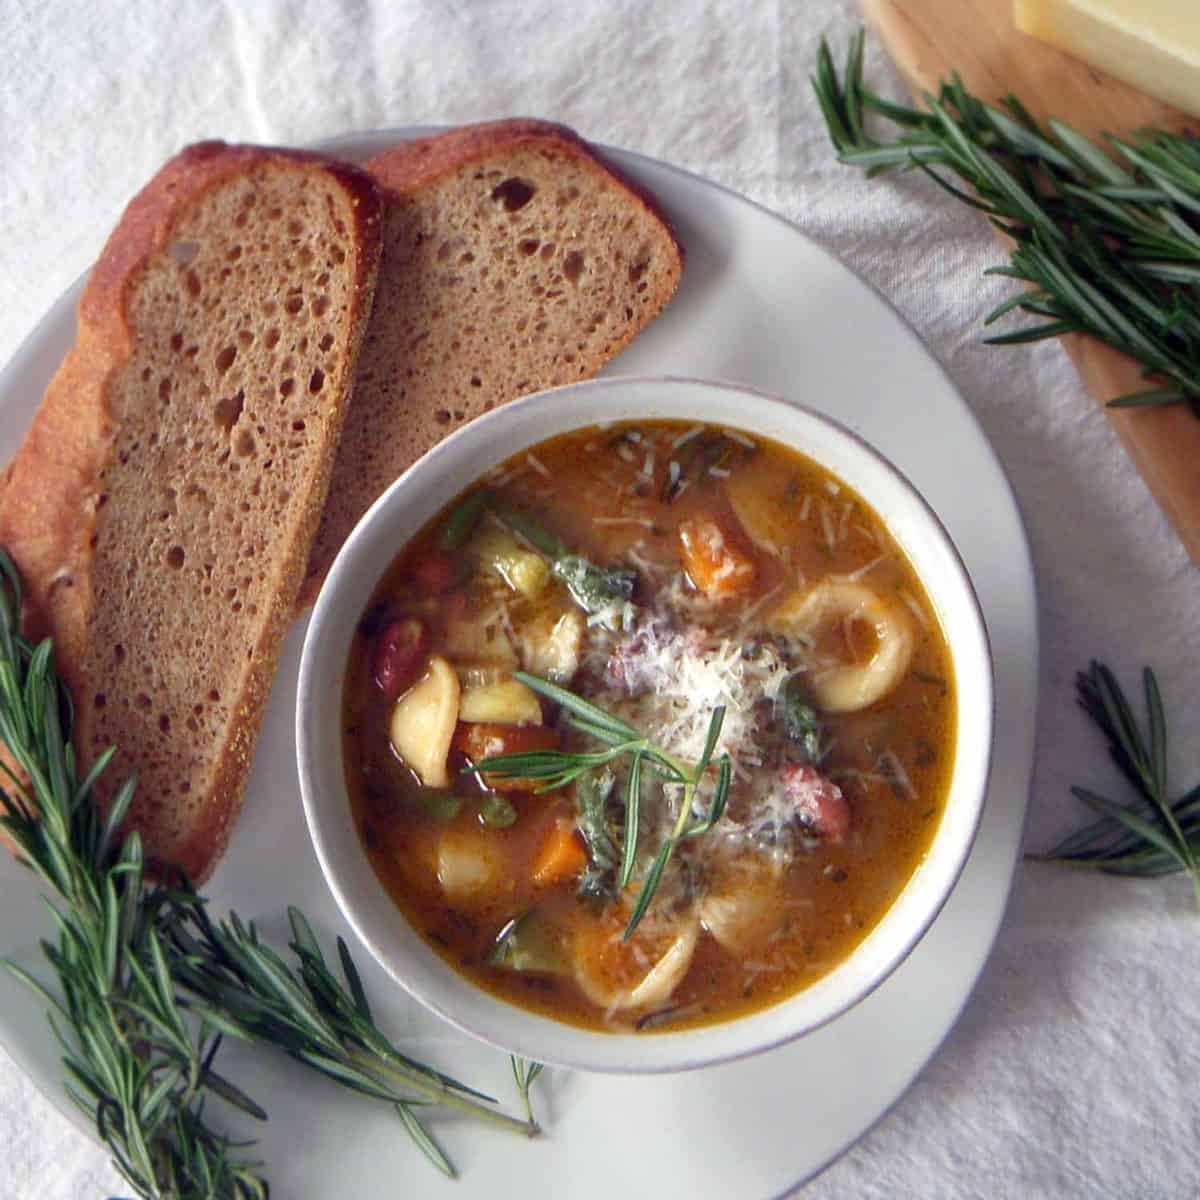 Bird's eye view of minestrone soup in a white bowl, on a white plate, with bread slices and a sprig of rosemary on the side.